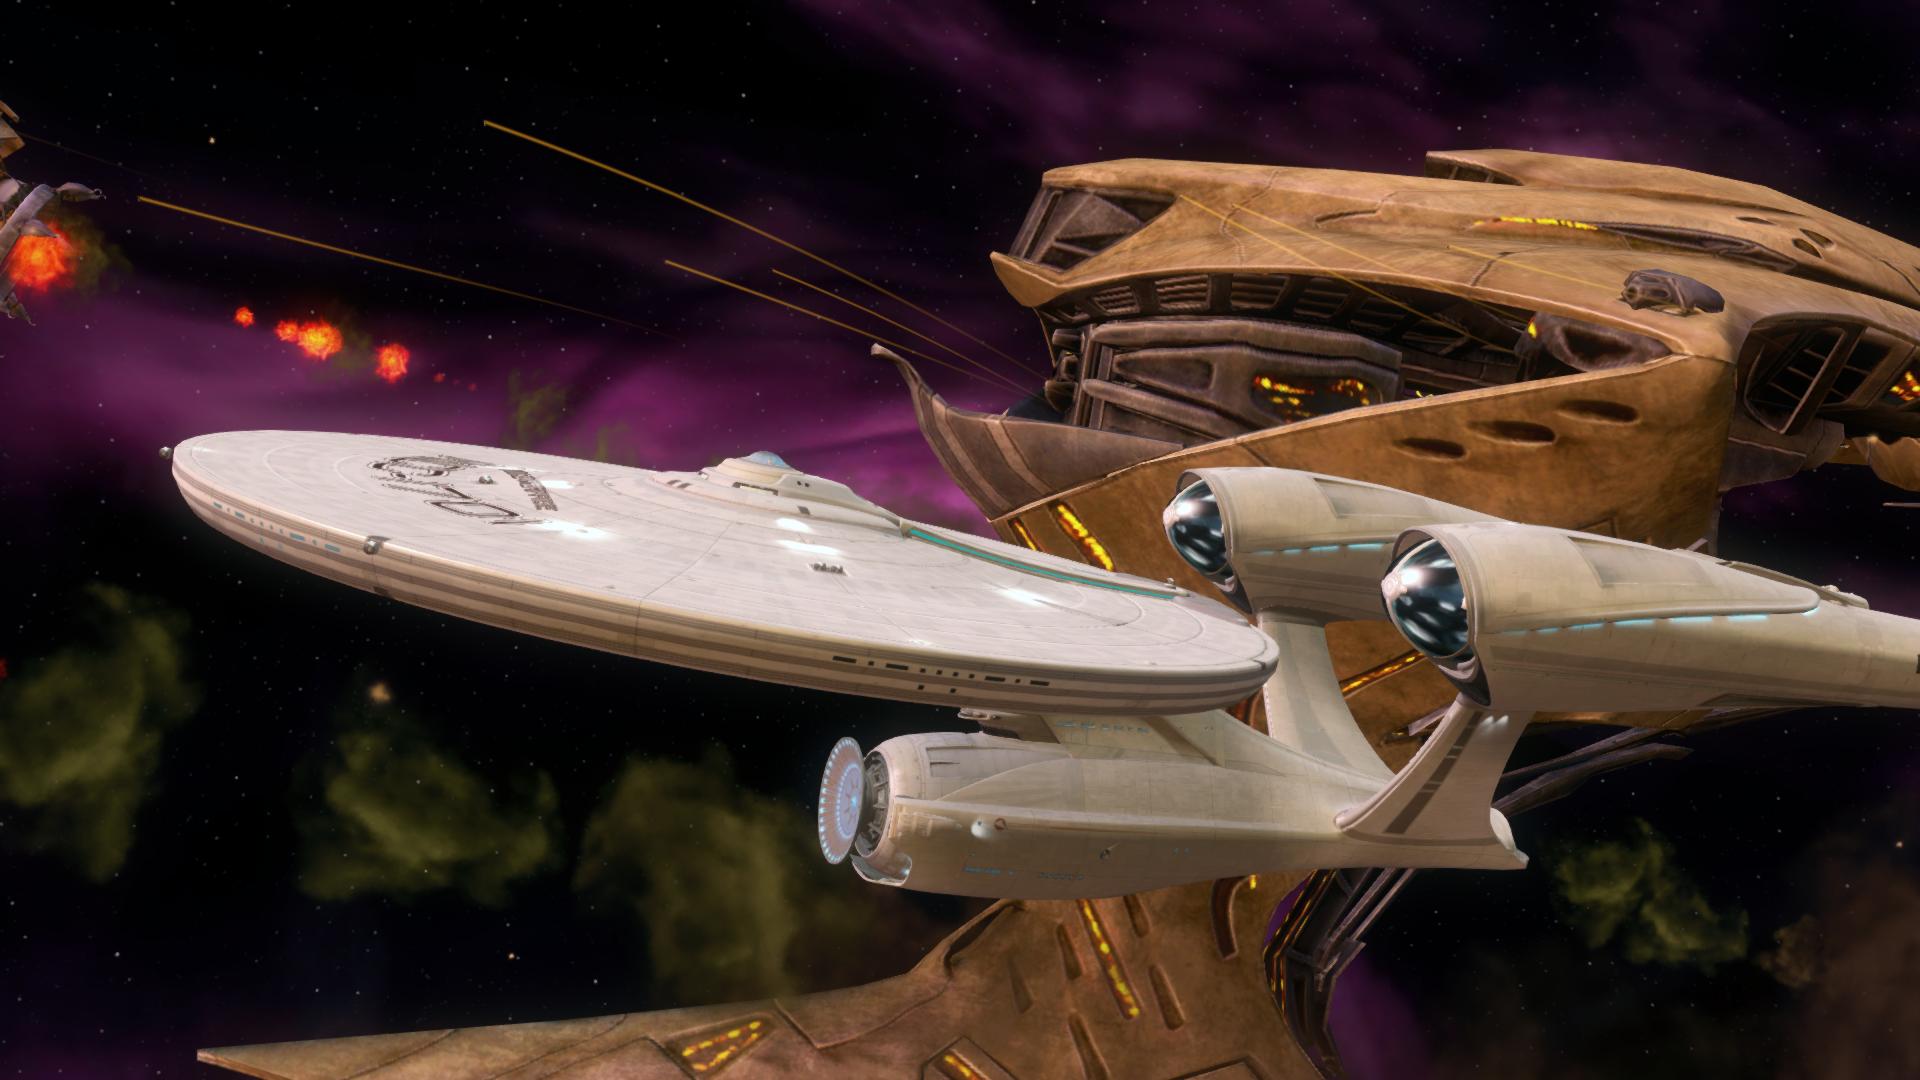 New Images & Story Details From Star Trek Video Game